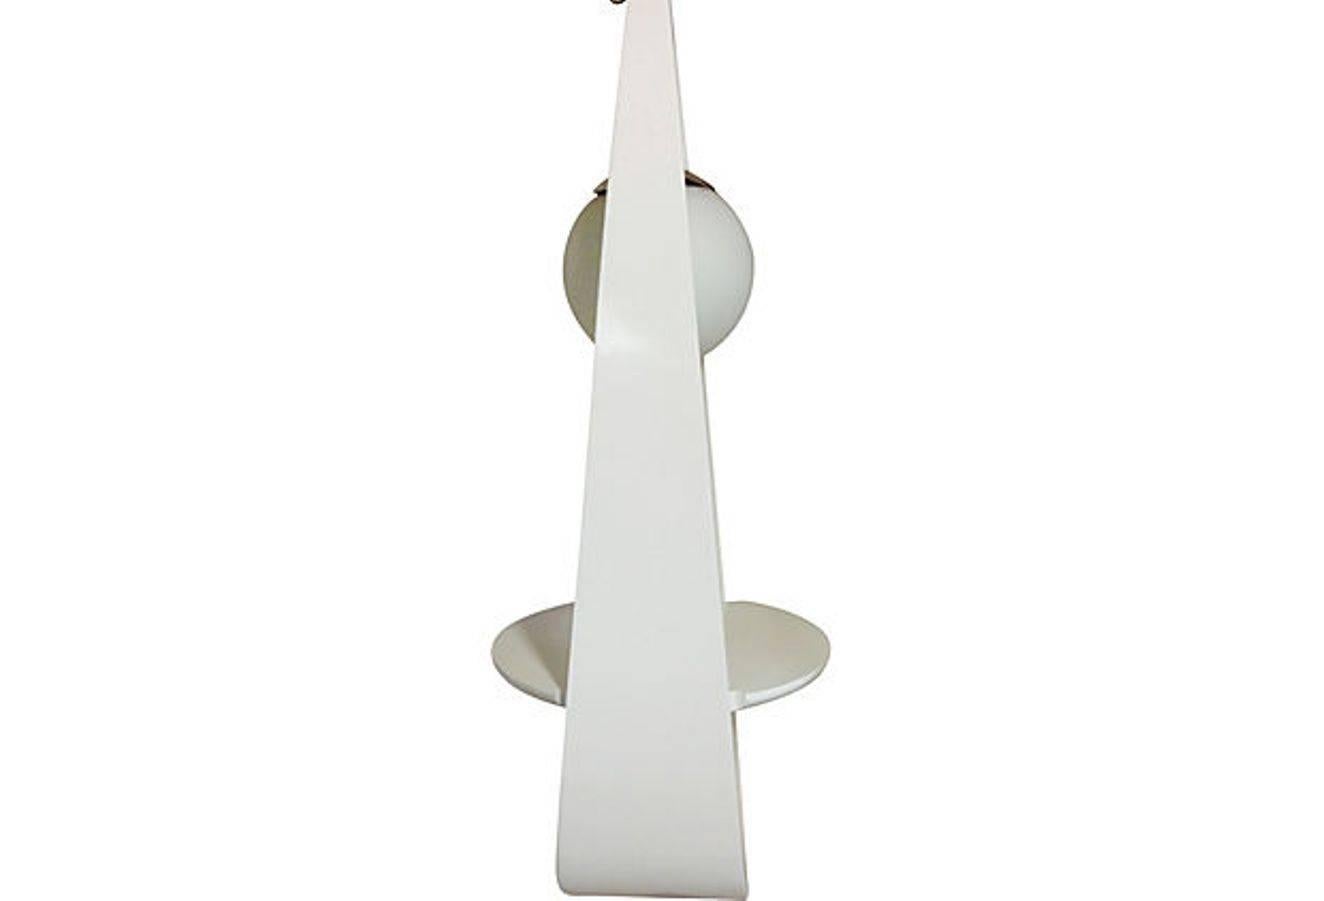 1970'S MOD Wood & Chrome Hanging Pendant Light By, Milo Baughman. This unique and coveted freshly painted the original bright white lacquer wood pendant light is teardrop and curved in shape with a built in 